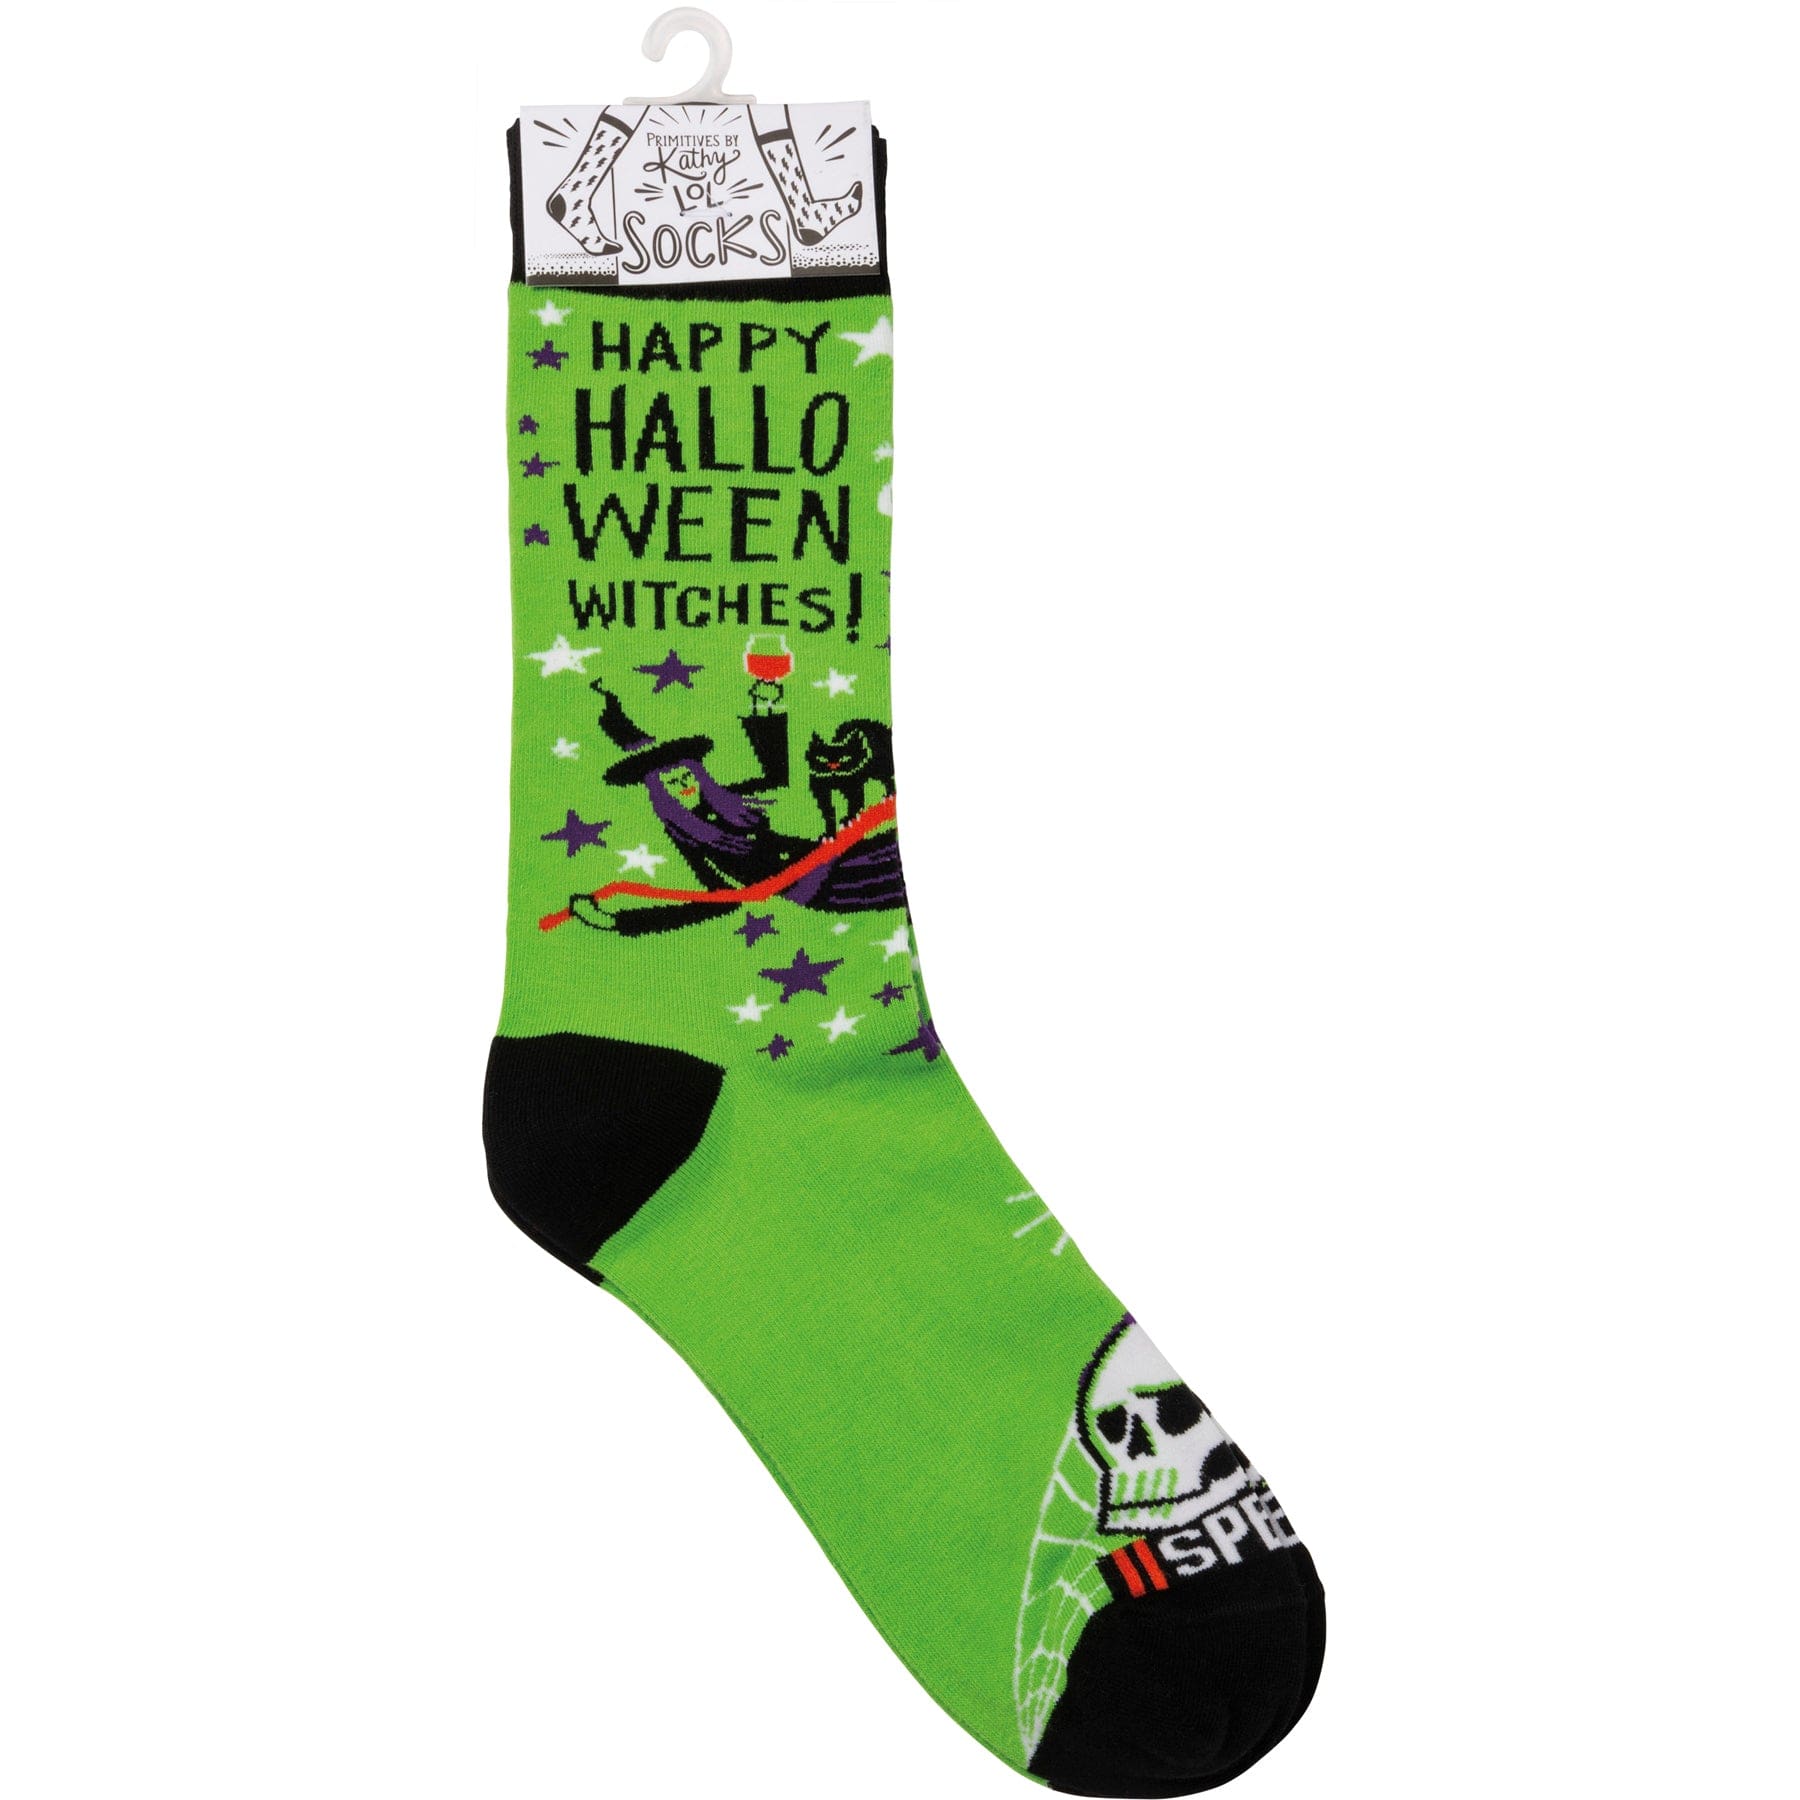 Socks One Size Fits Most Socks - Happy Halloween Witches PBK-107503